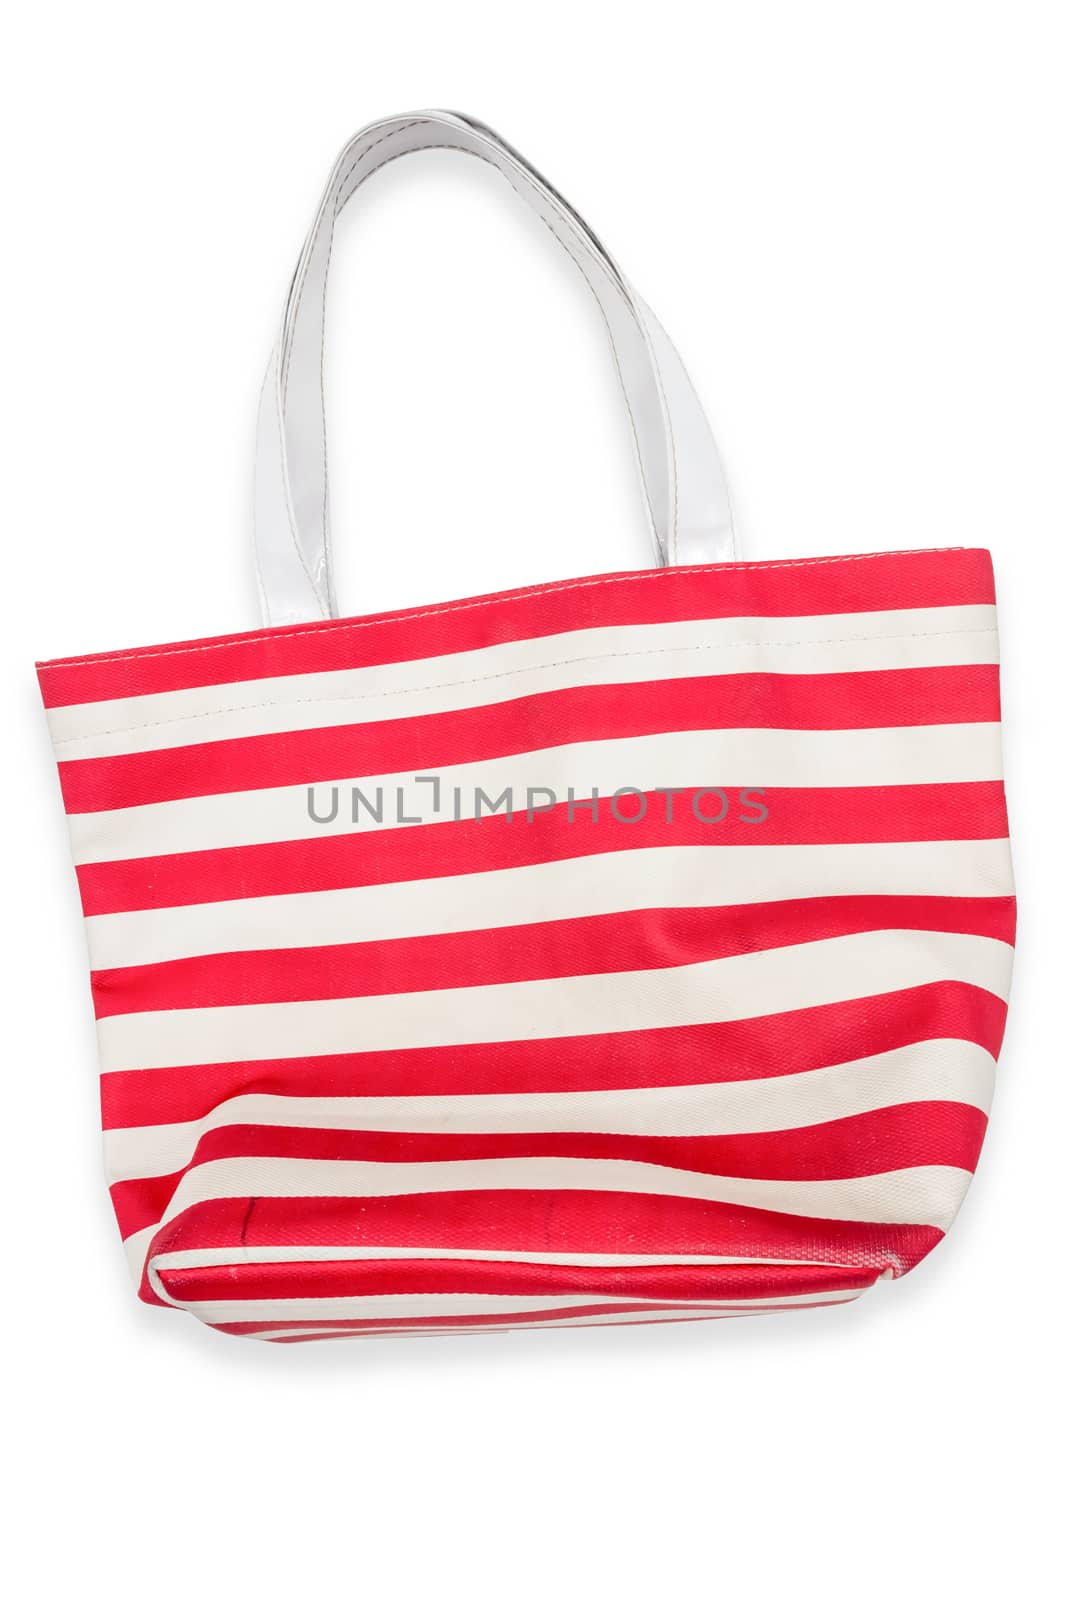 Red women bag on white background.